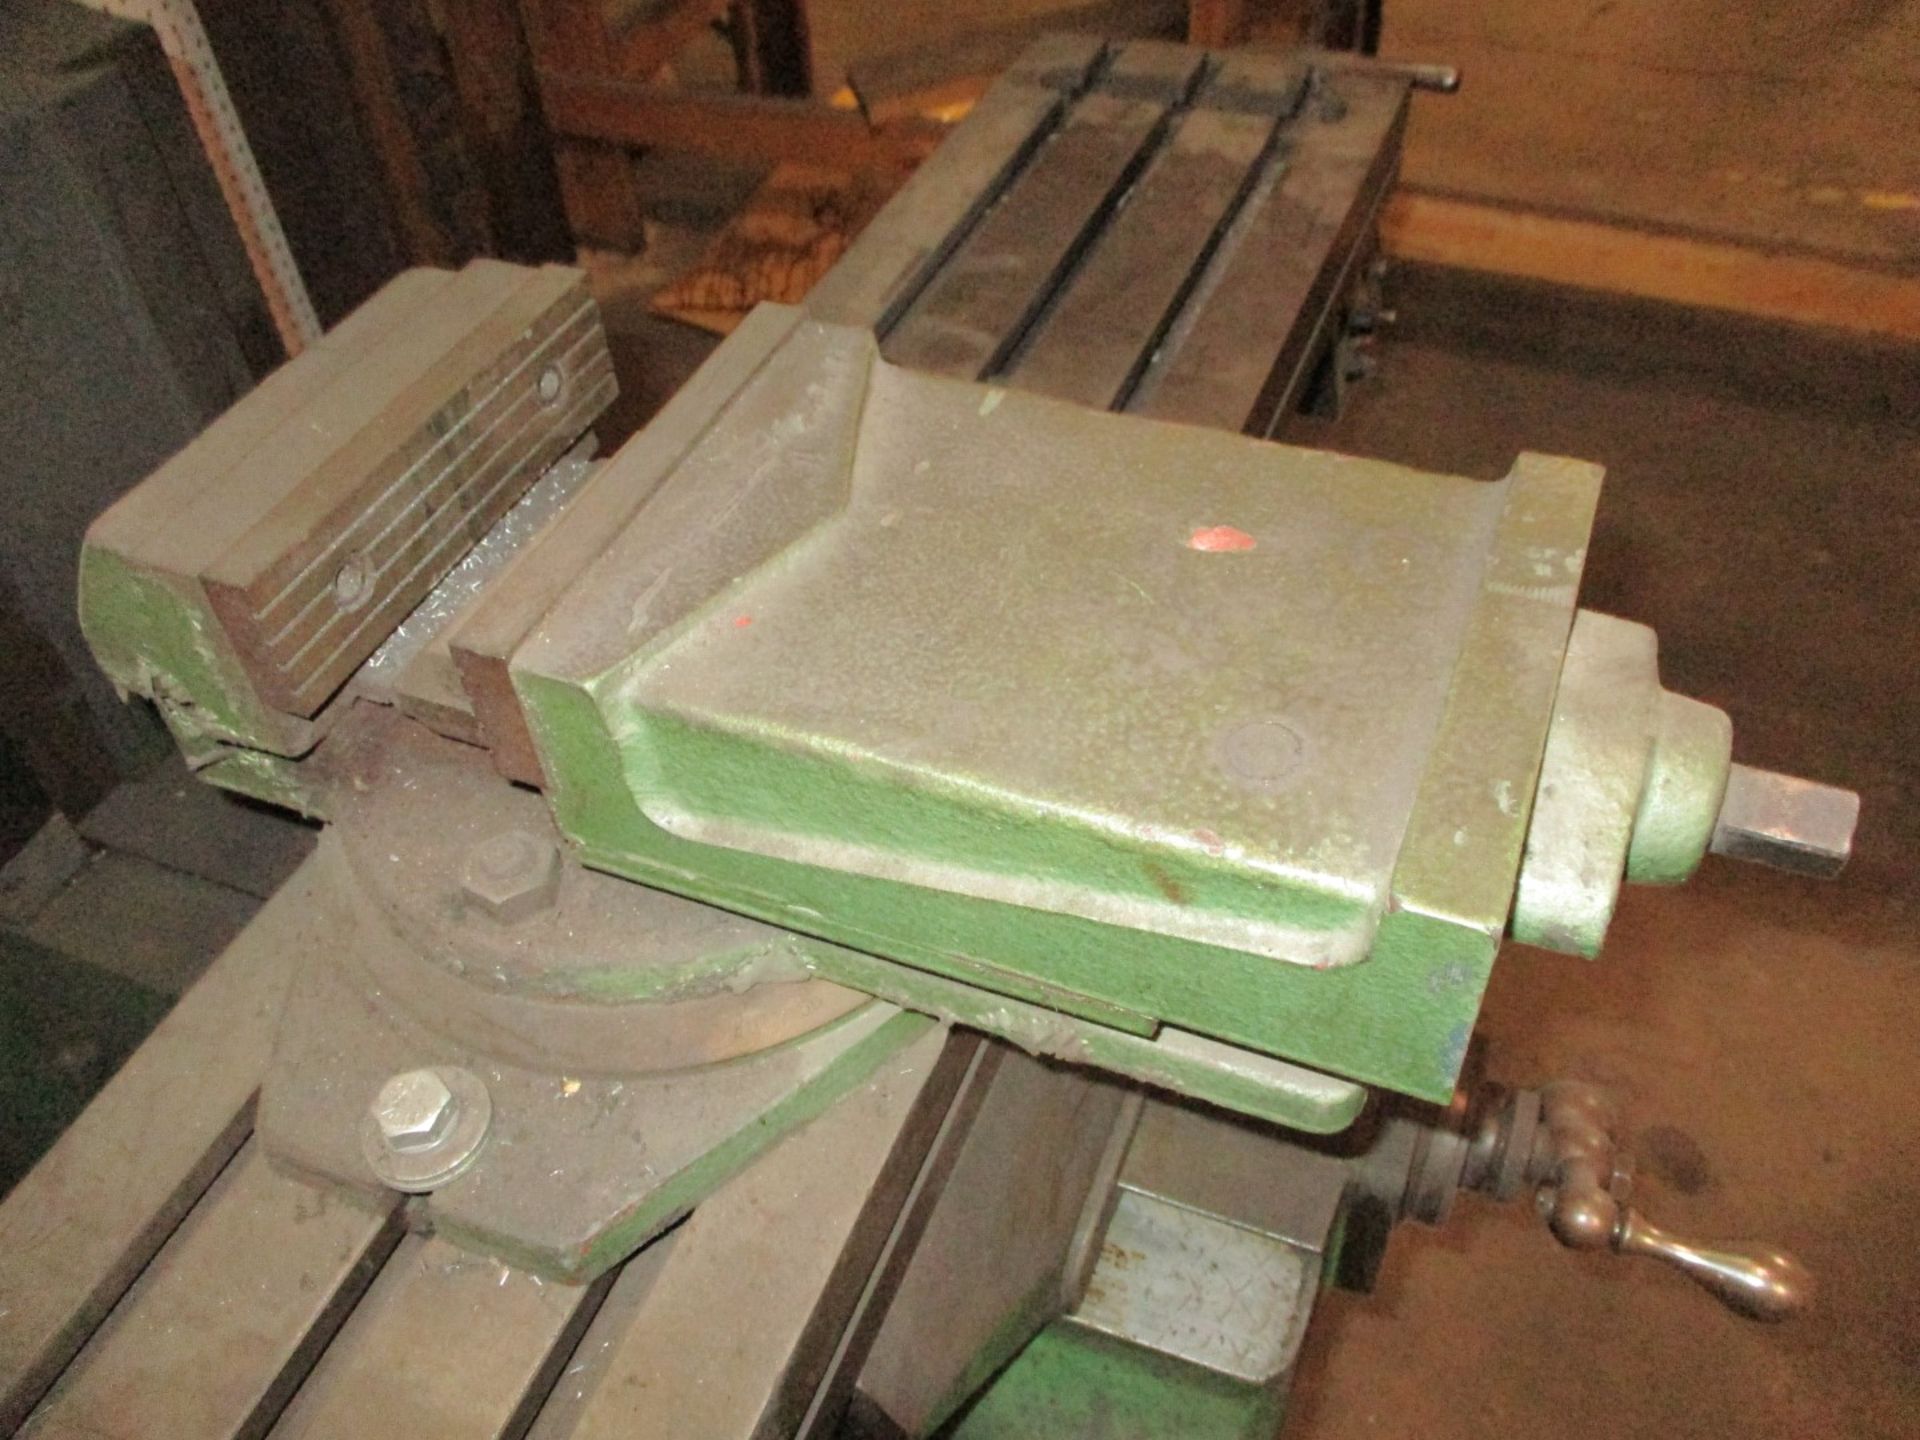 Bridgeport 1 HP Step Pulley Vertical Mill, SN 12BR76184, 9" x 42" Table, Table Powerfeed, 6" Mill - Image 2 of 8